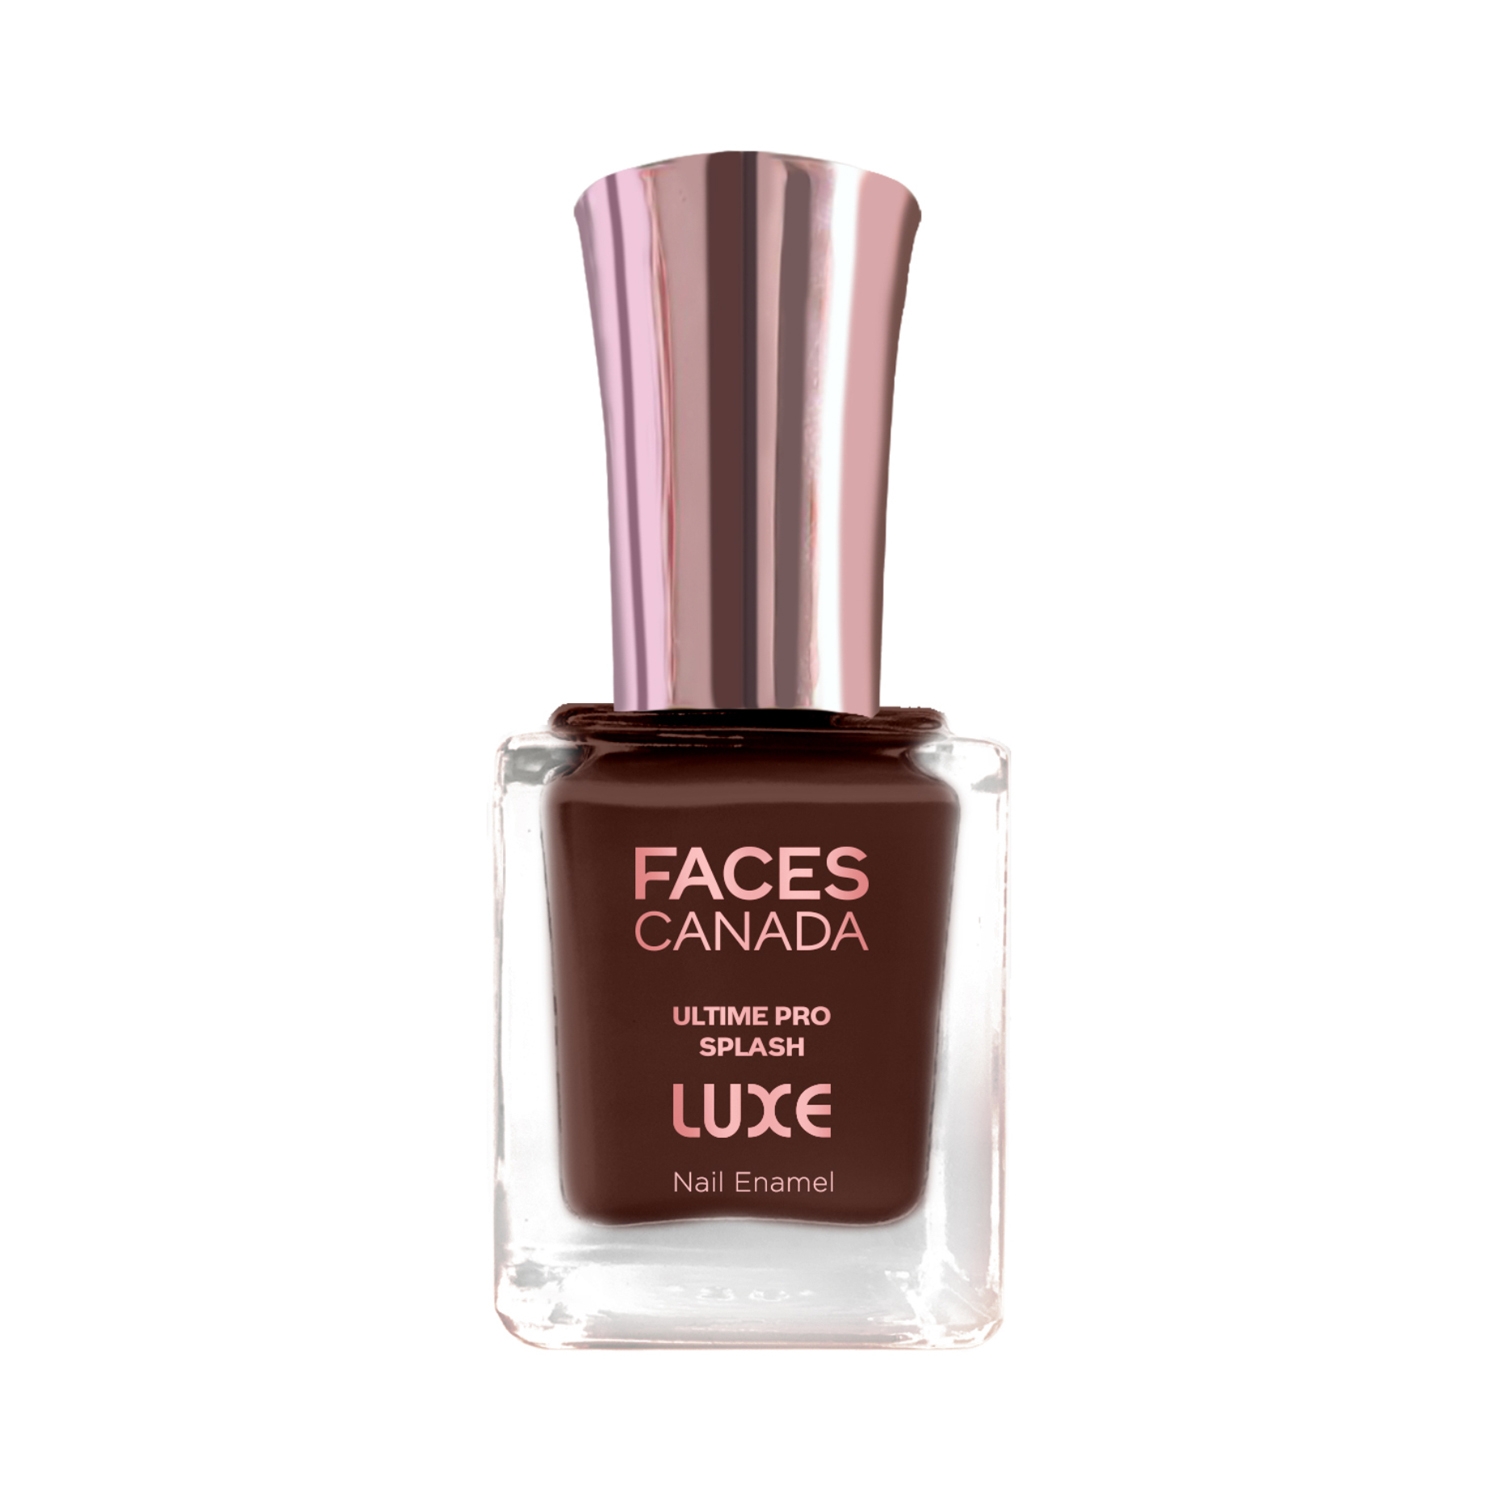 Faces Canada | Faces Canada Ultime Pro Splash Luxe Nail Enamel - L20 Fairy Touch (12ml)